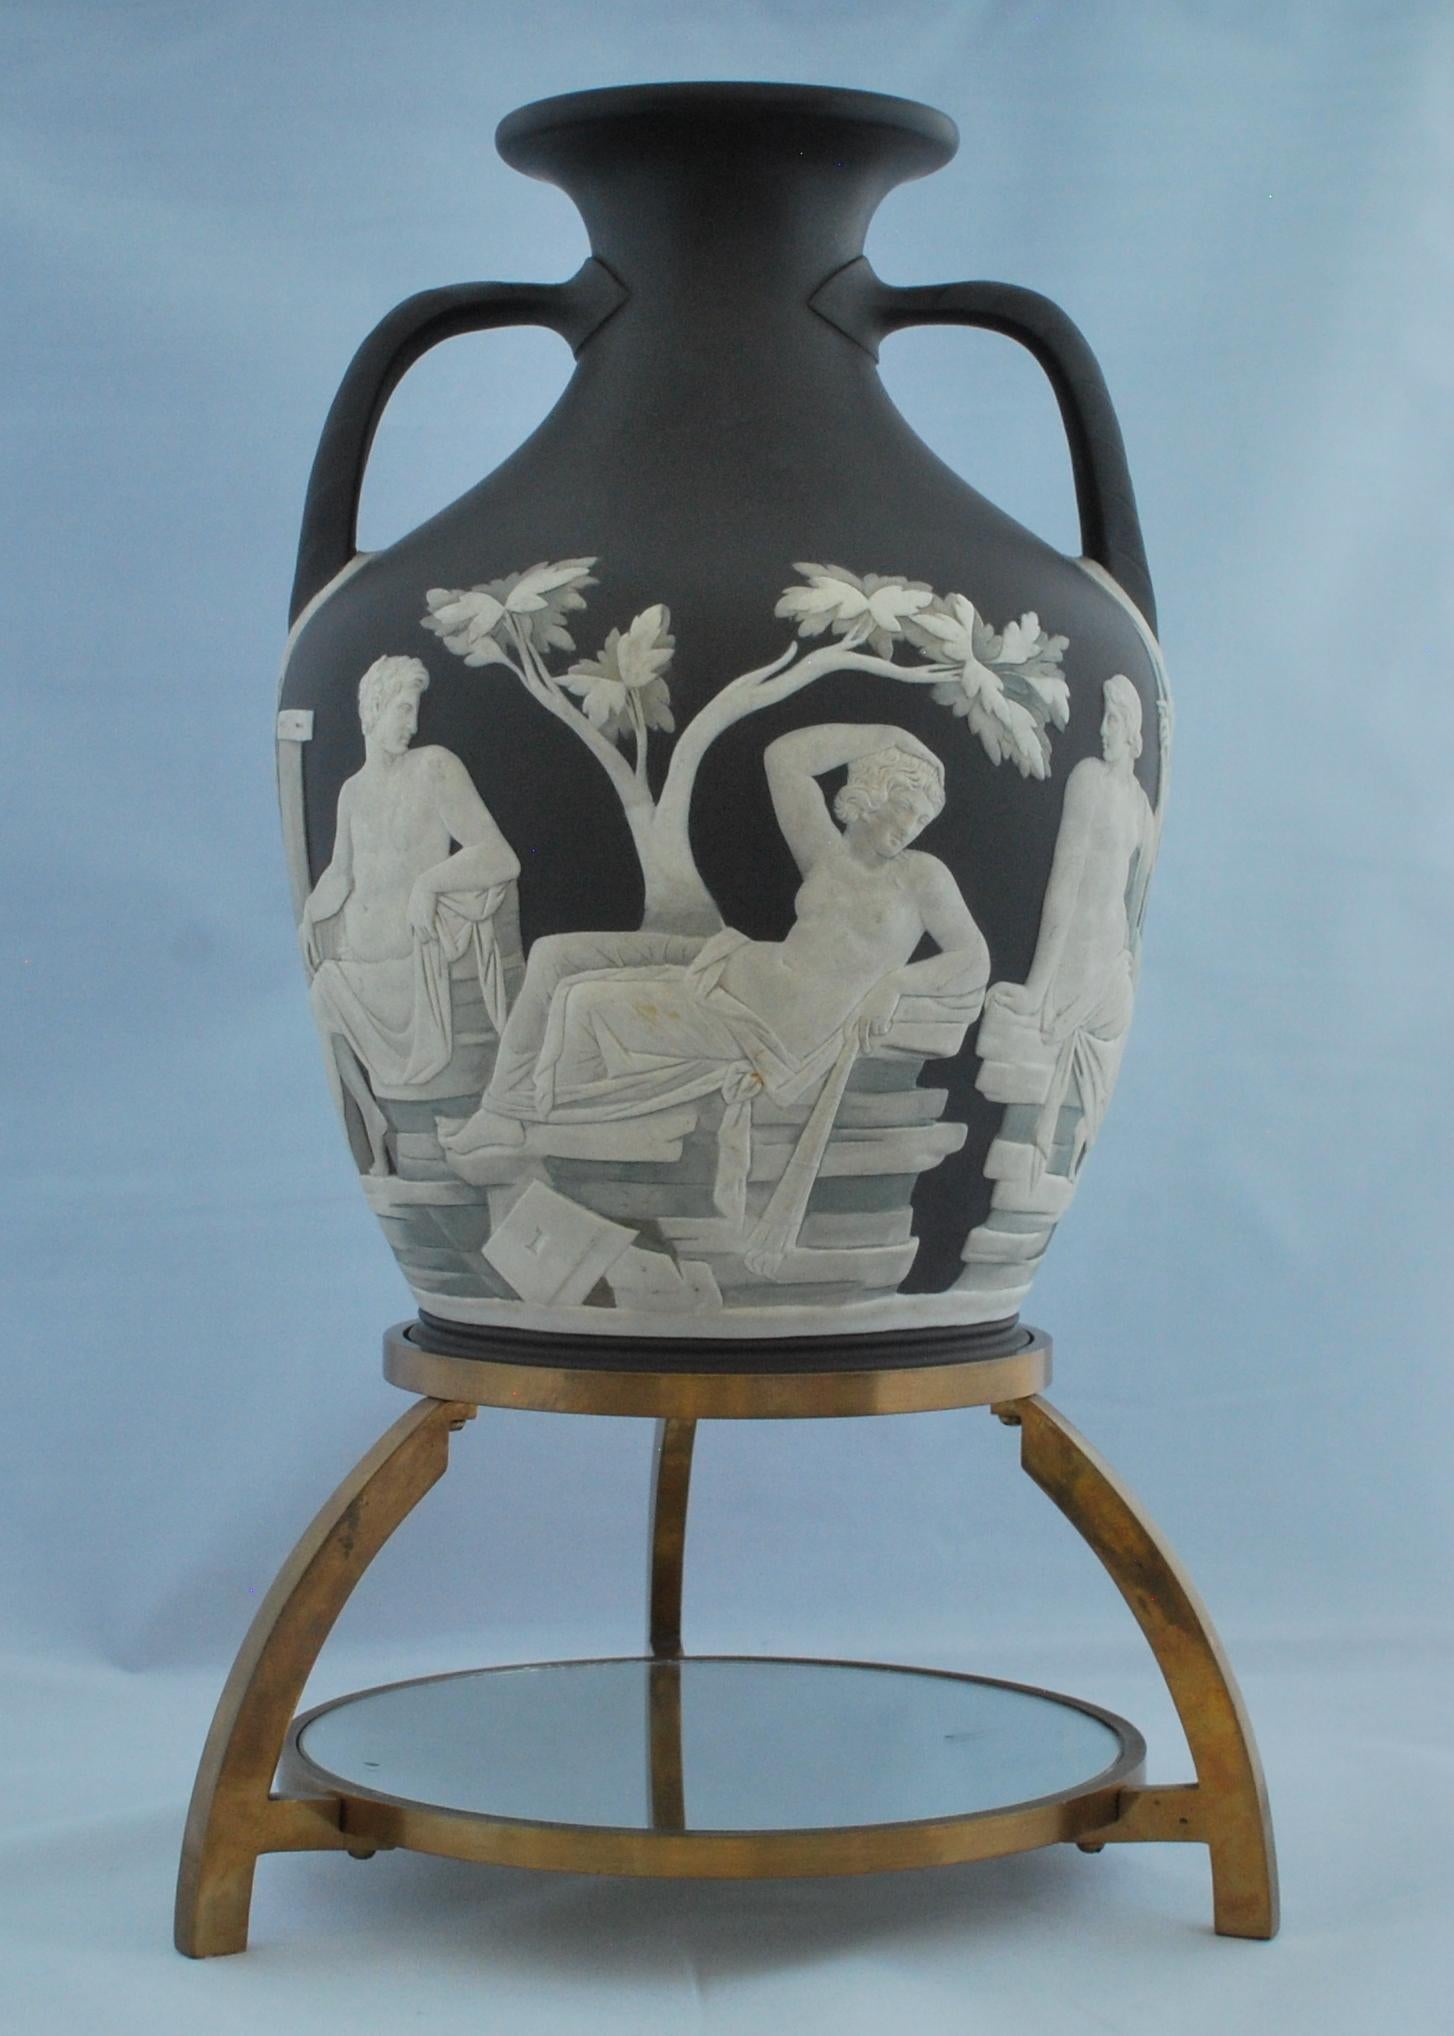 One of the finest copies of The Portland Vase that Wedgwood produced, in many ways rivalling the First Edition itself. 

Decorated by Thomas Lovatt, then cut, polished and shaded by John Northwood in his glass engraving studio. Although 30 copies